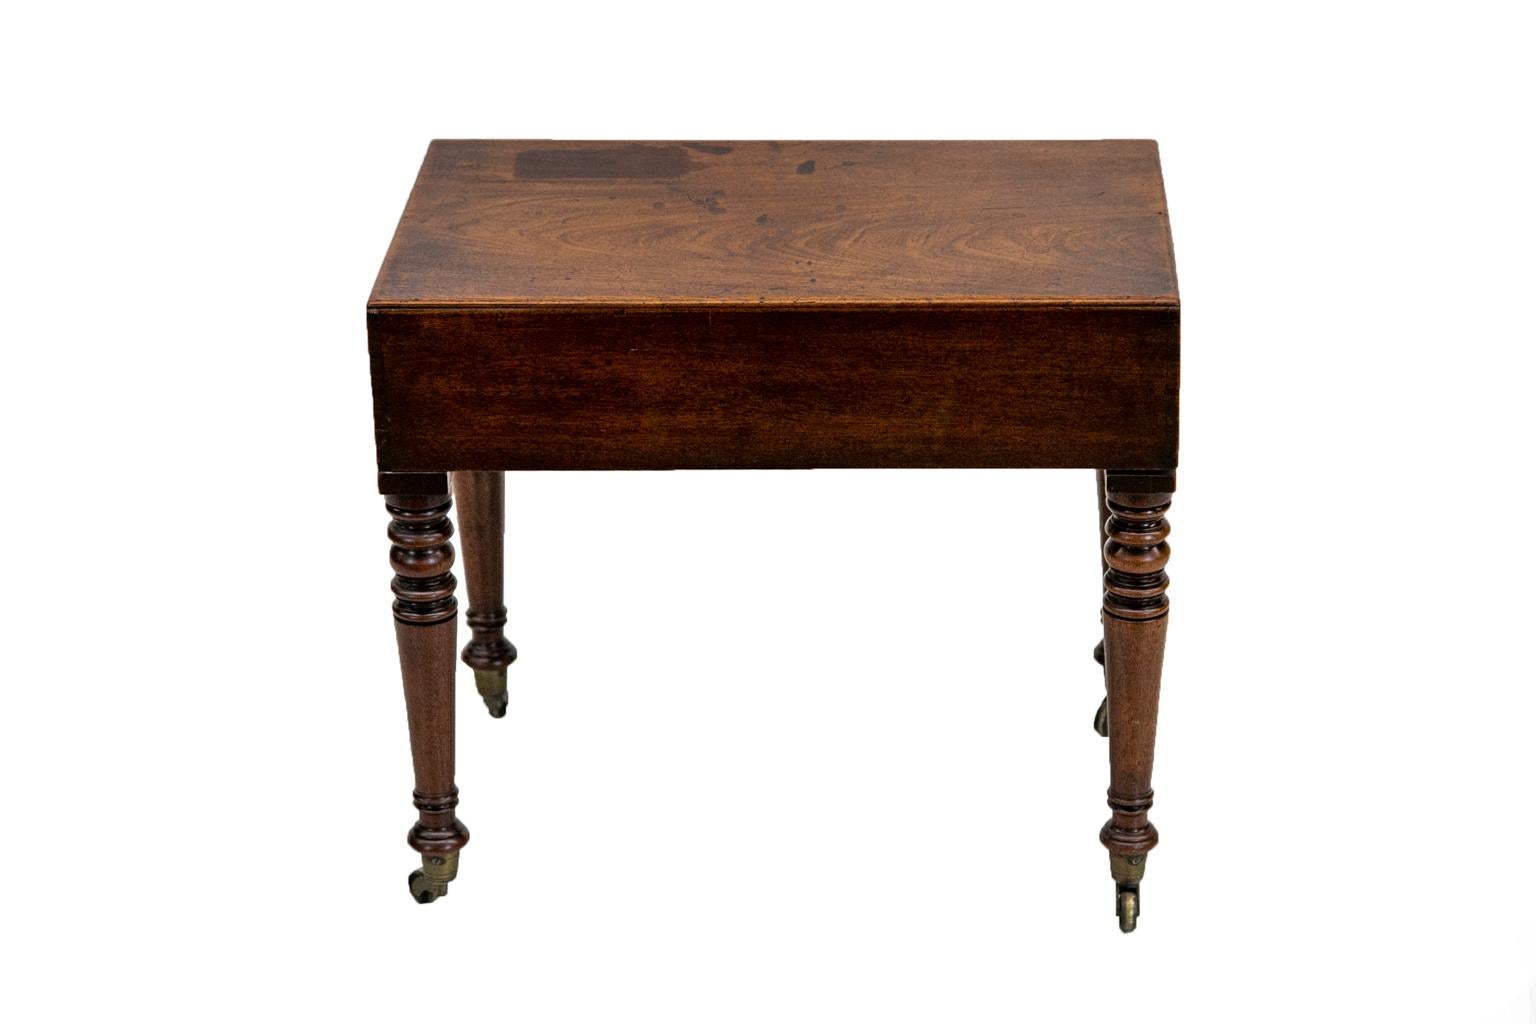 This English mahogany bidet table has a lift-off top that exposes the original Staffordshire earthenware liner, which is not cracked but has a three- by- one inch piece missing from the rim. The liner is removable. The top has dovetailed